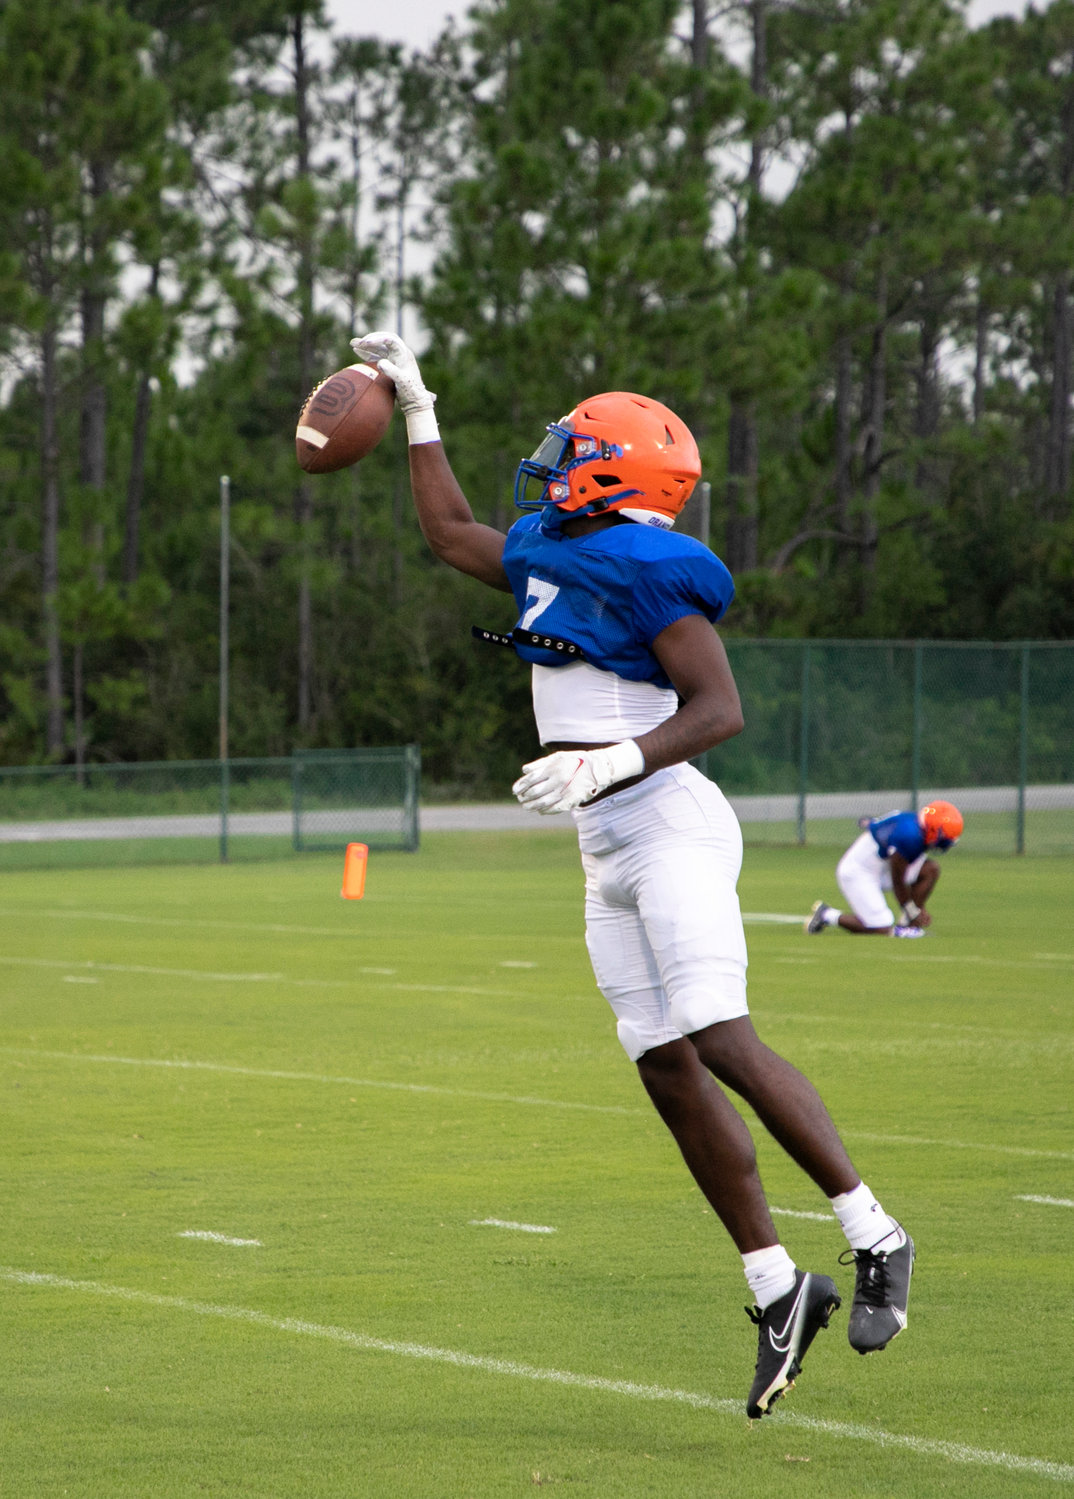 Orange Beach senior Chris Pearson fields a punt in warmups ahead of the Makos’ intrasquad scrimmage Aug. 12 at the Sportsplex. Orange Beach hosts its first regular season home game Friday against Jackson in the region opener.